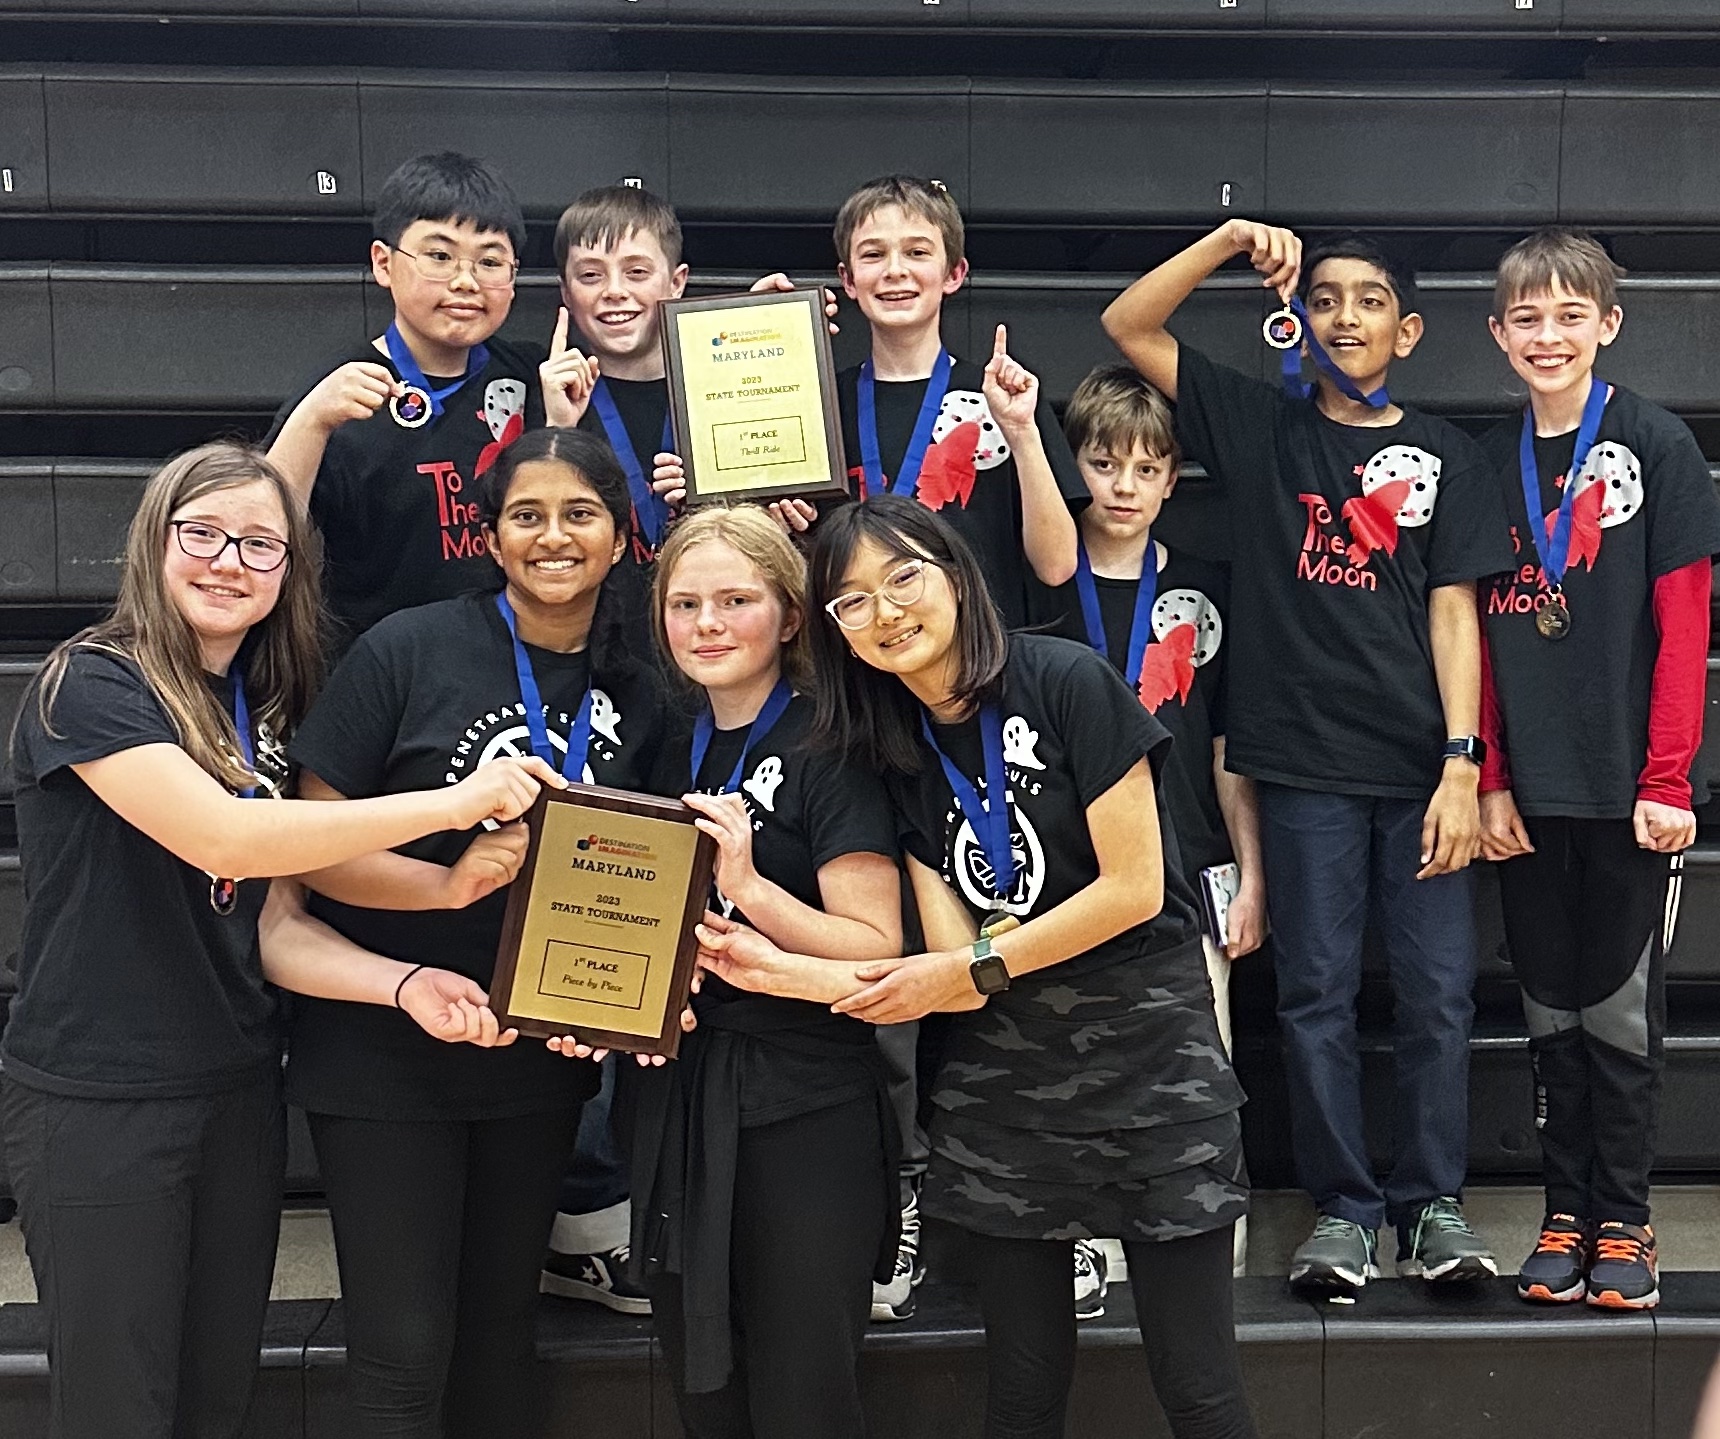 Middle School students in the Destination Imagination program hold up their awards.